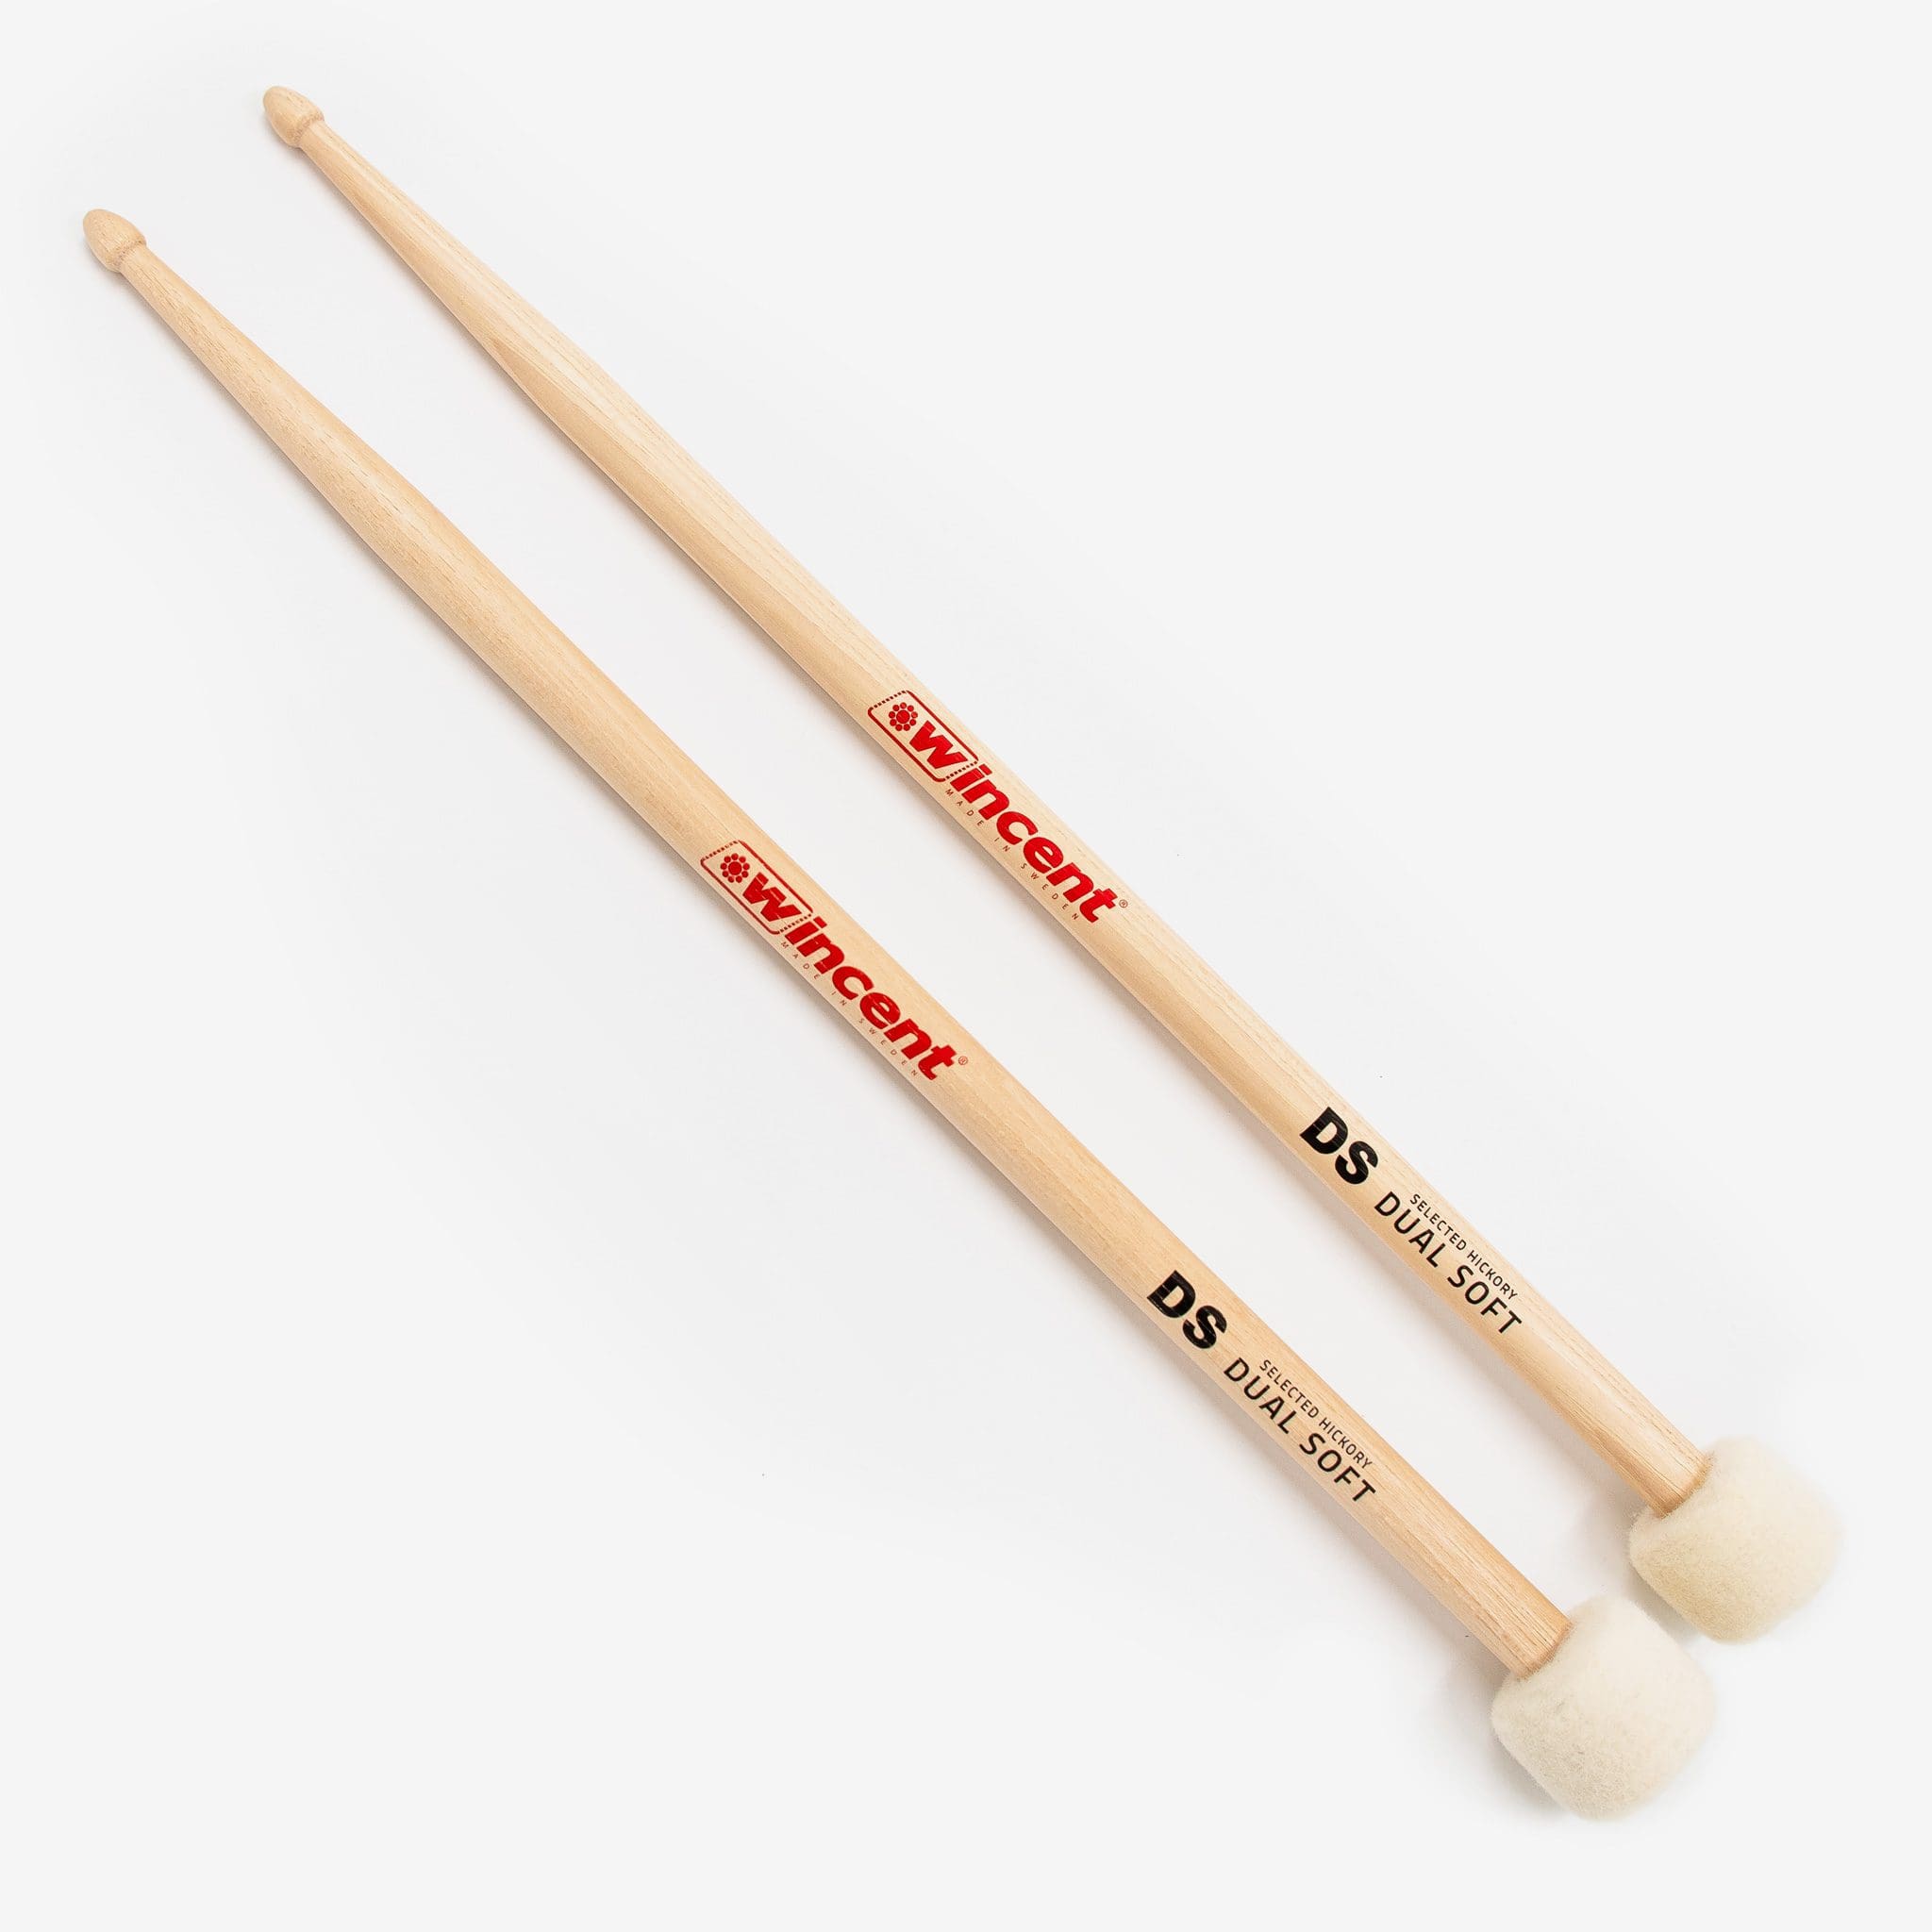 DualSoft Double Sided Cymbal Mallet Pair